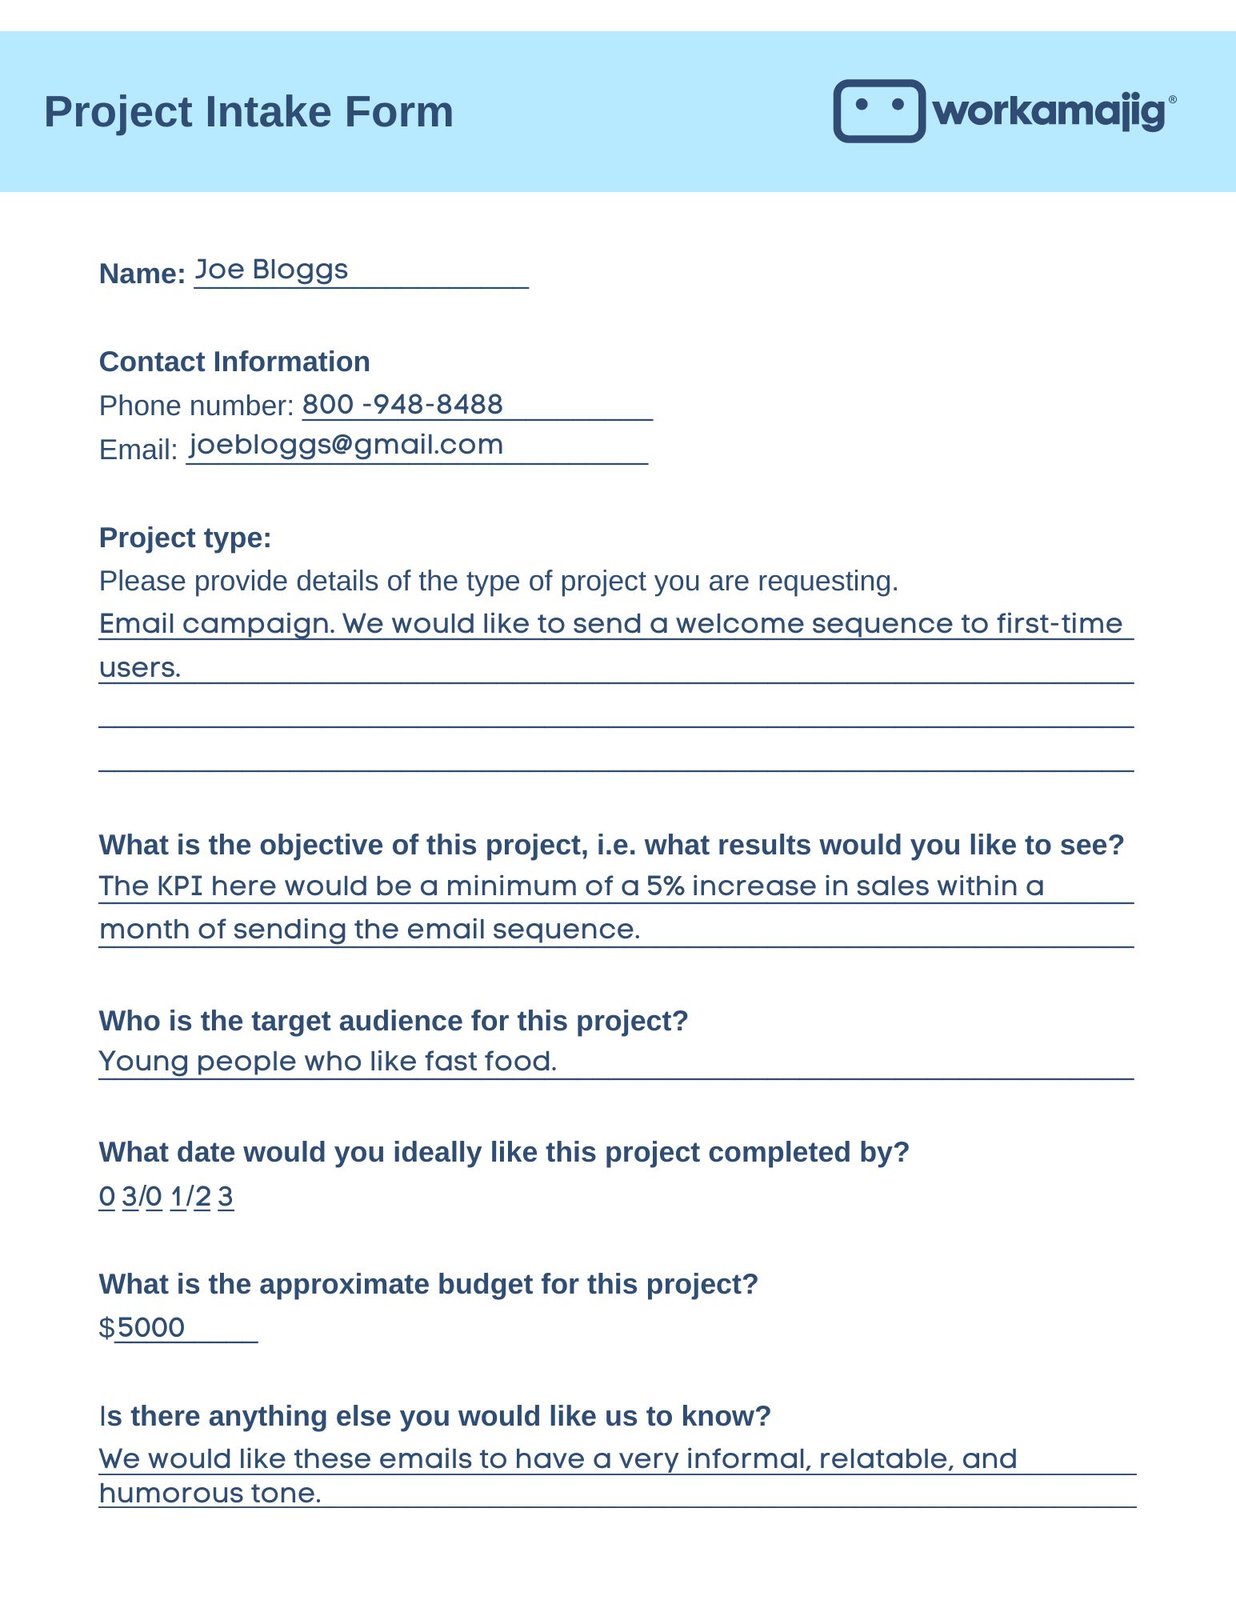 Project Intake Form Explained   Free Template and Examples